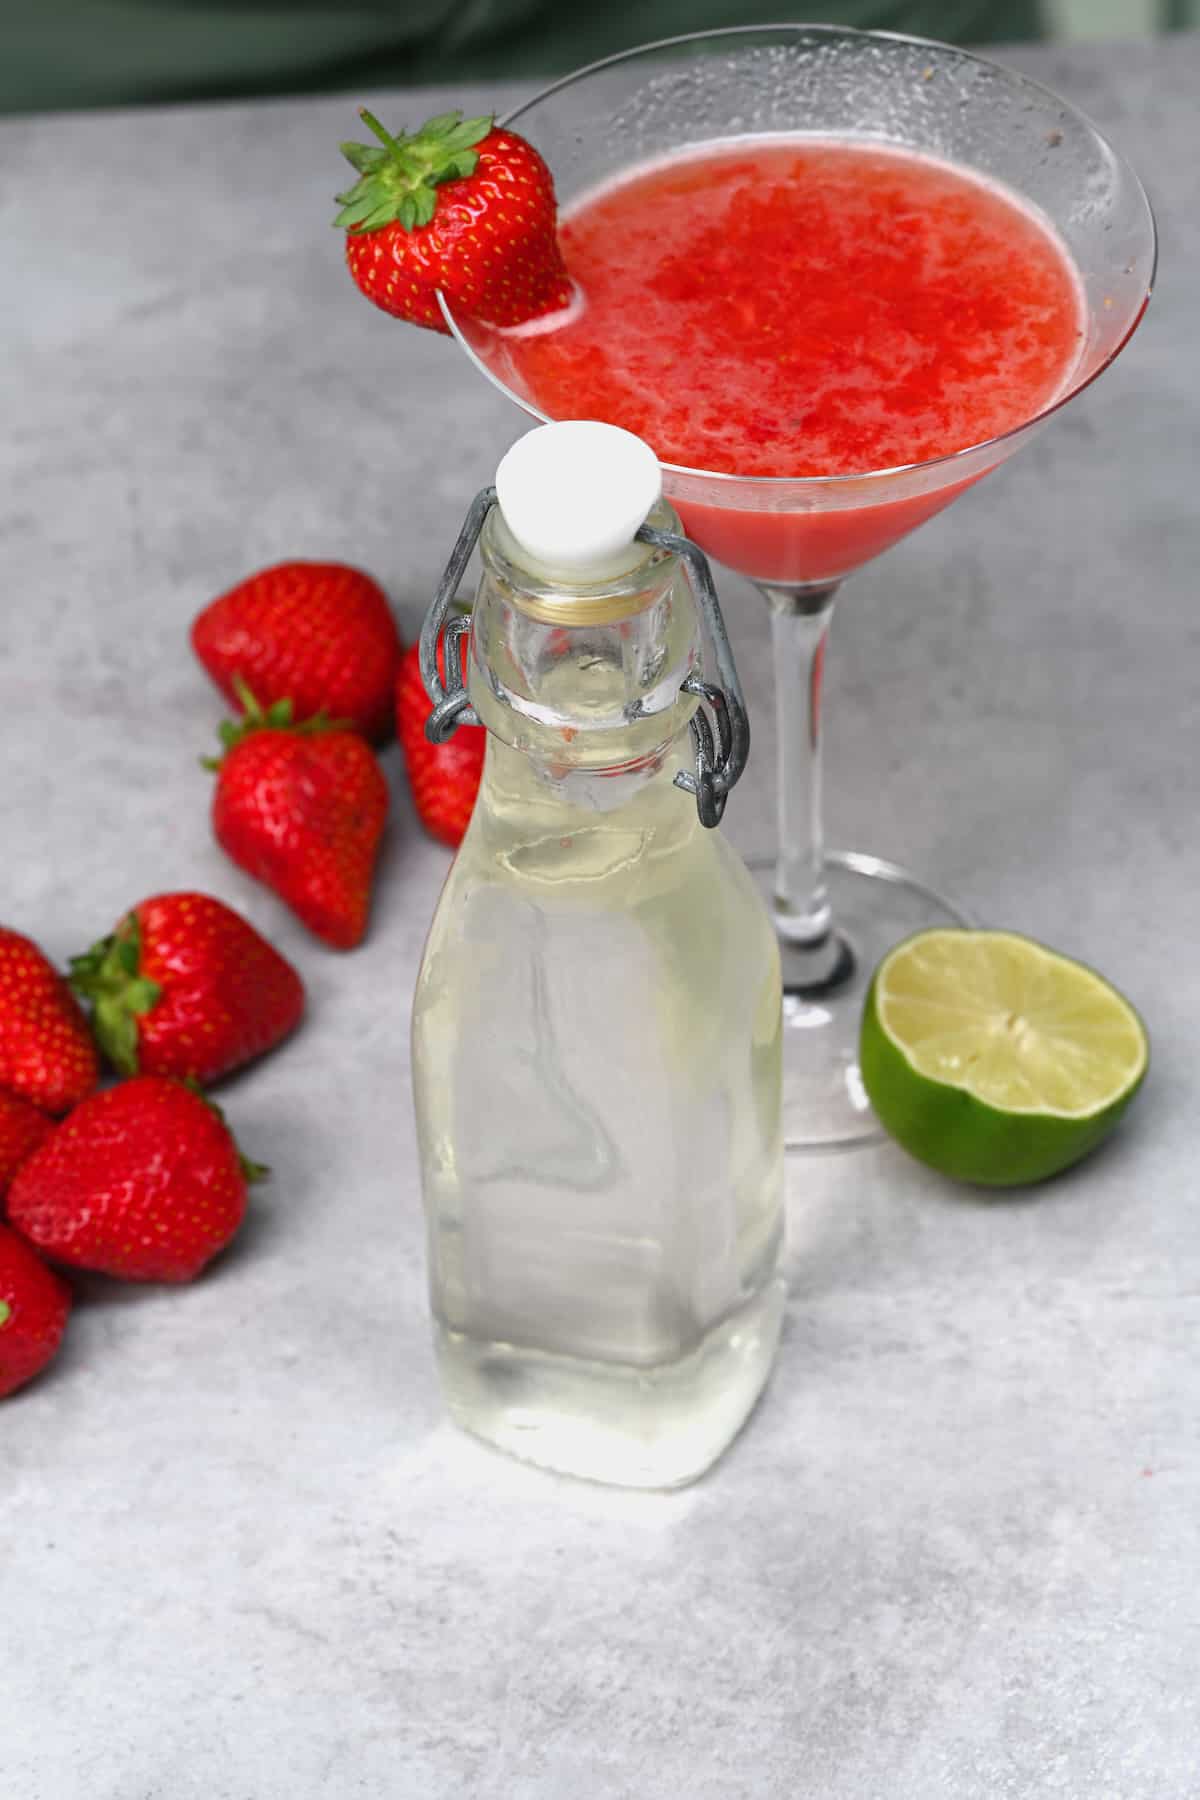 A bottle of simple syrup and a strawberry cocktail